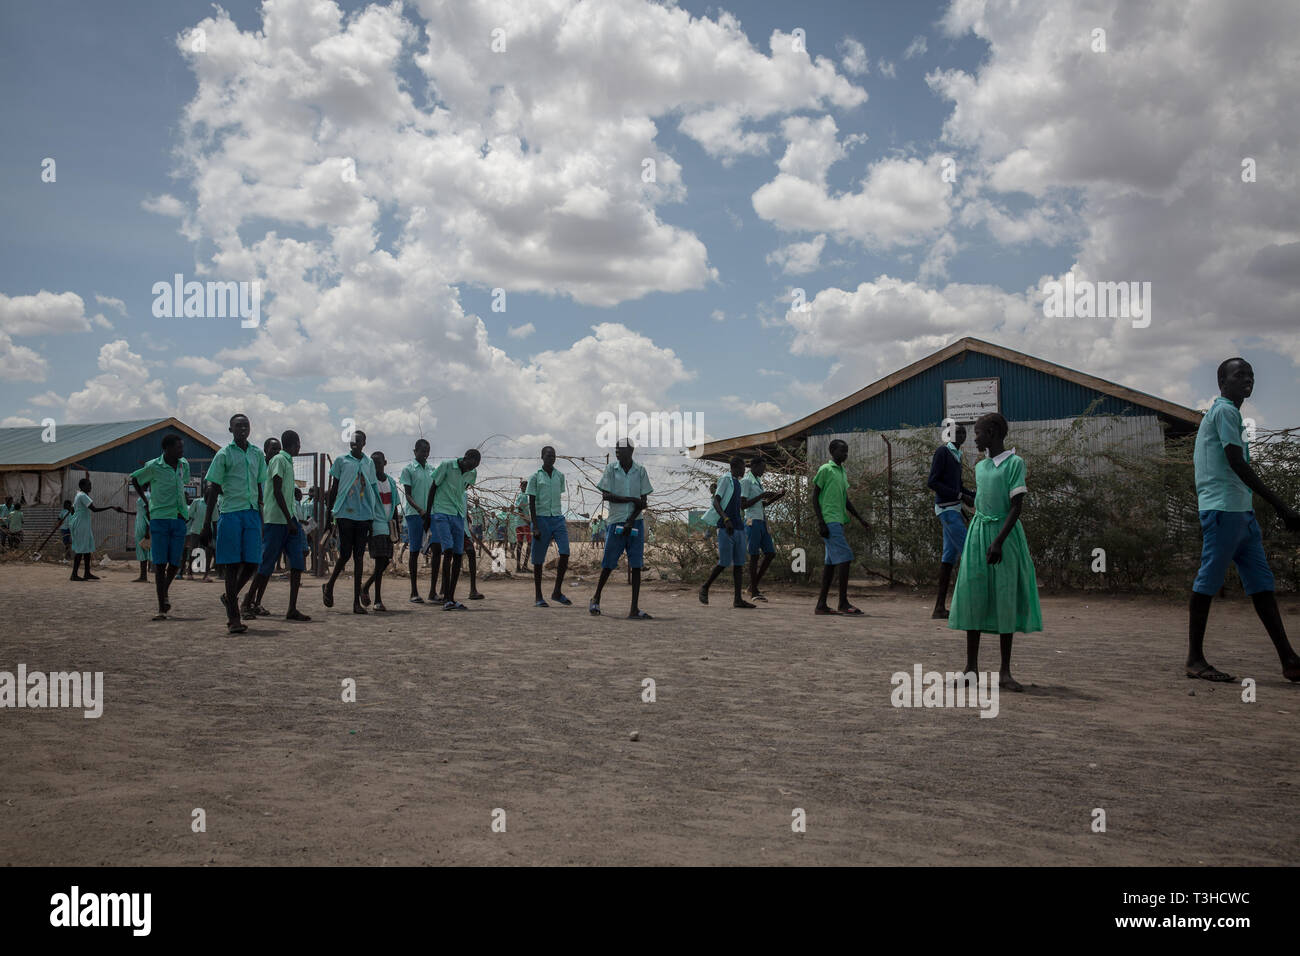 Children leave school in Kakuma refugee camp, northwest Kenya. Kakuma is home to members of the local Turkana community and the nearby refugee camps shelter roughly 190,000 refugees from countries including Ethiopia, Burundi, Somalia, Tanzania and Uganda. Stock Photo